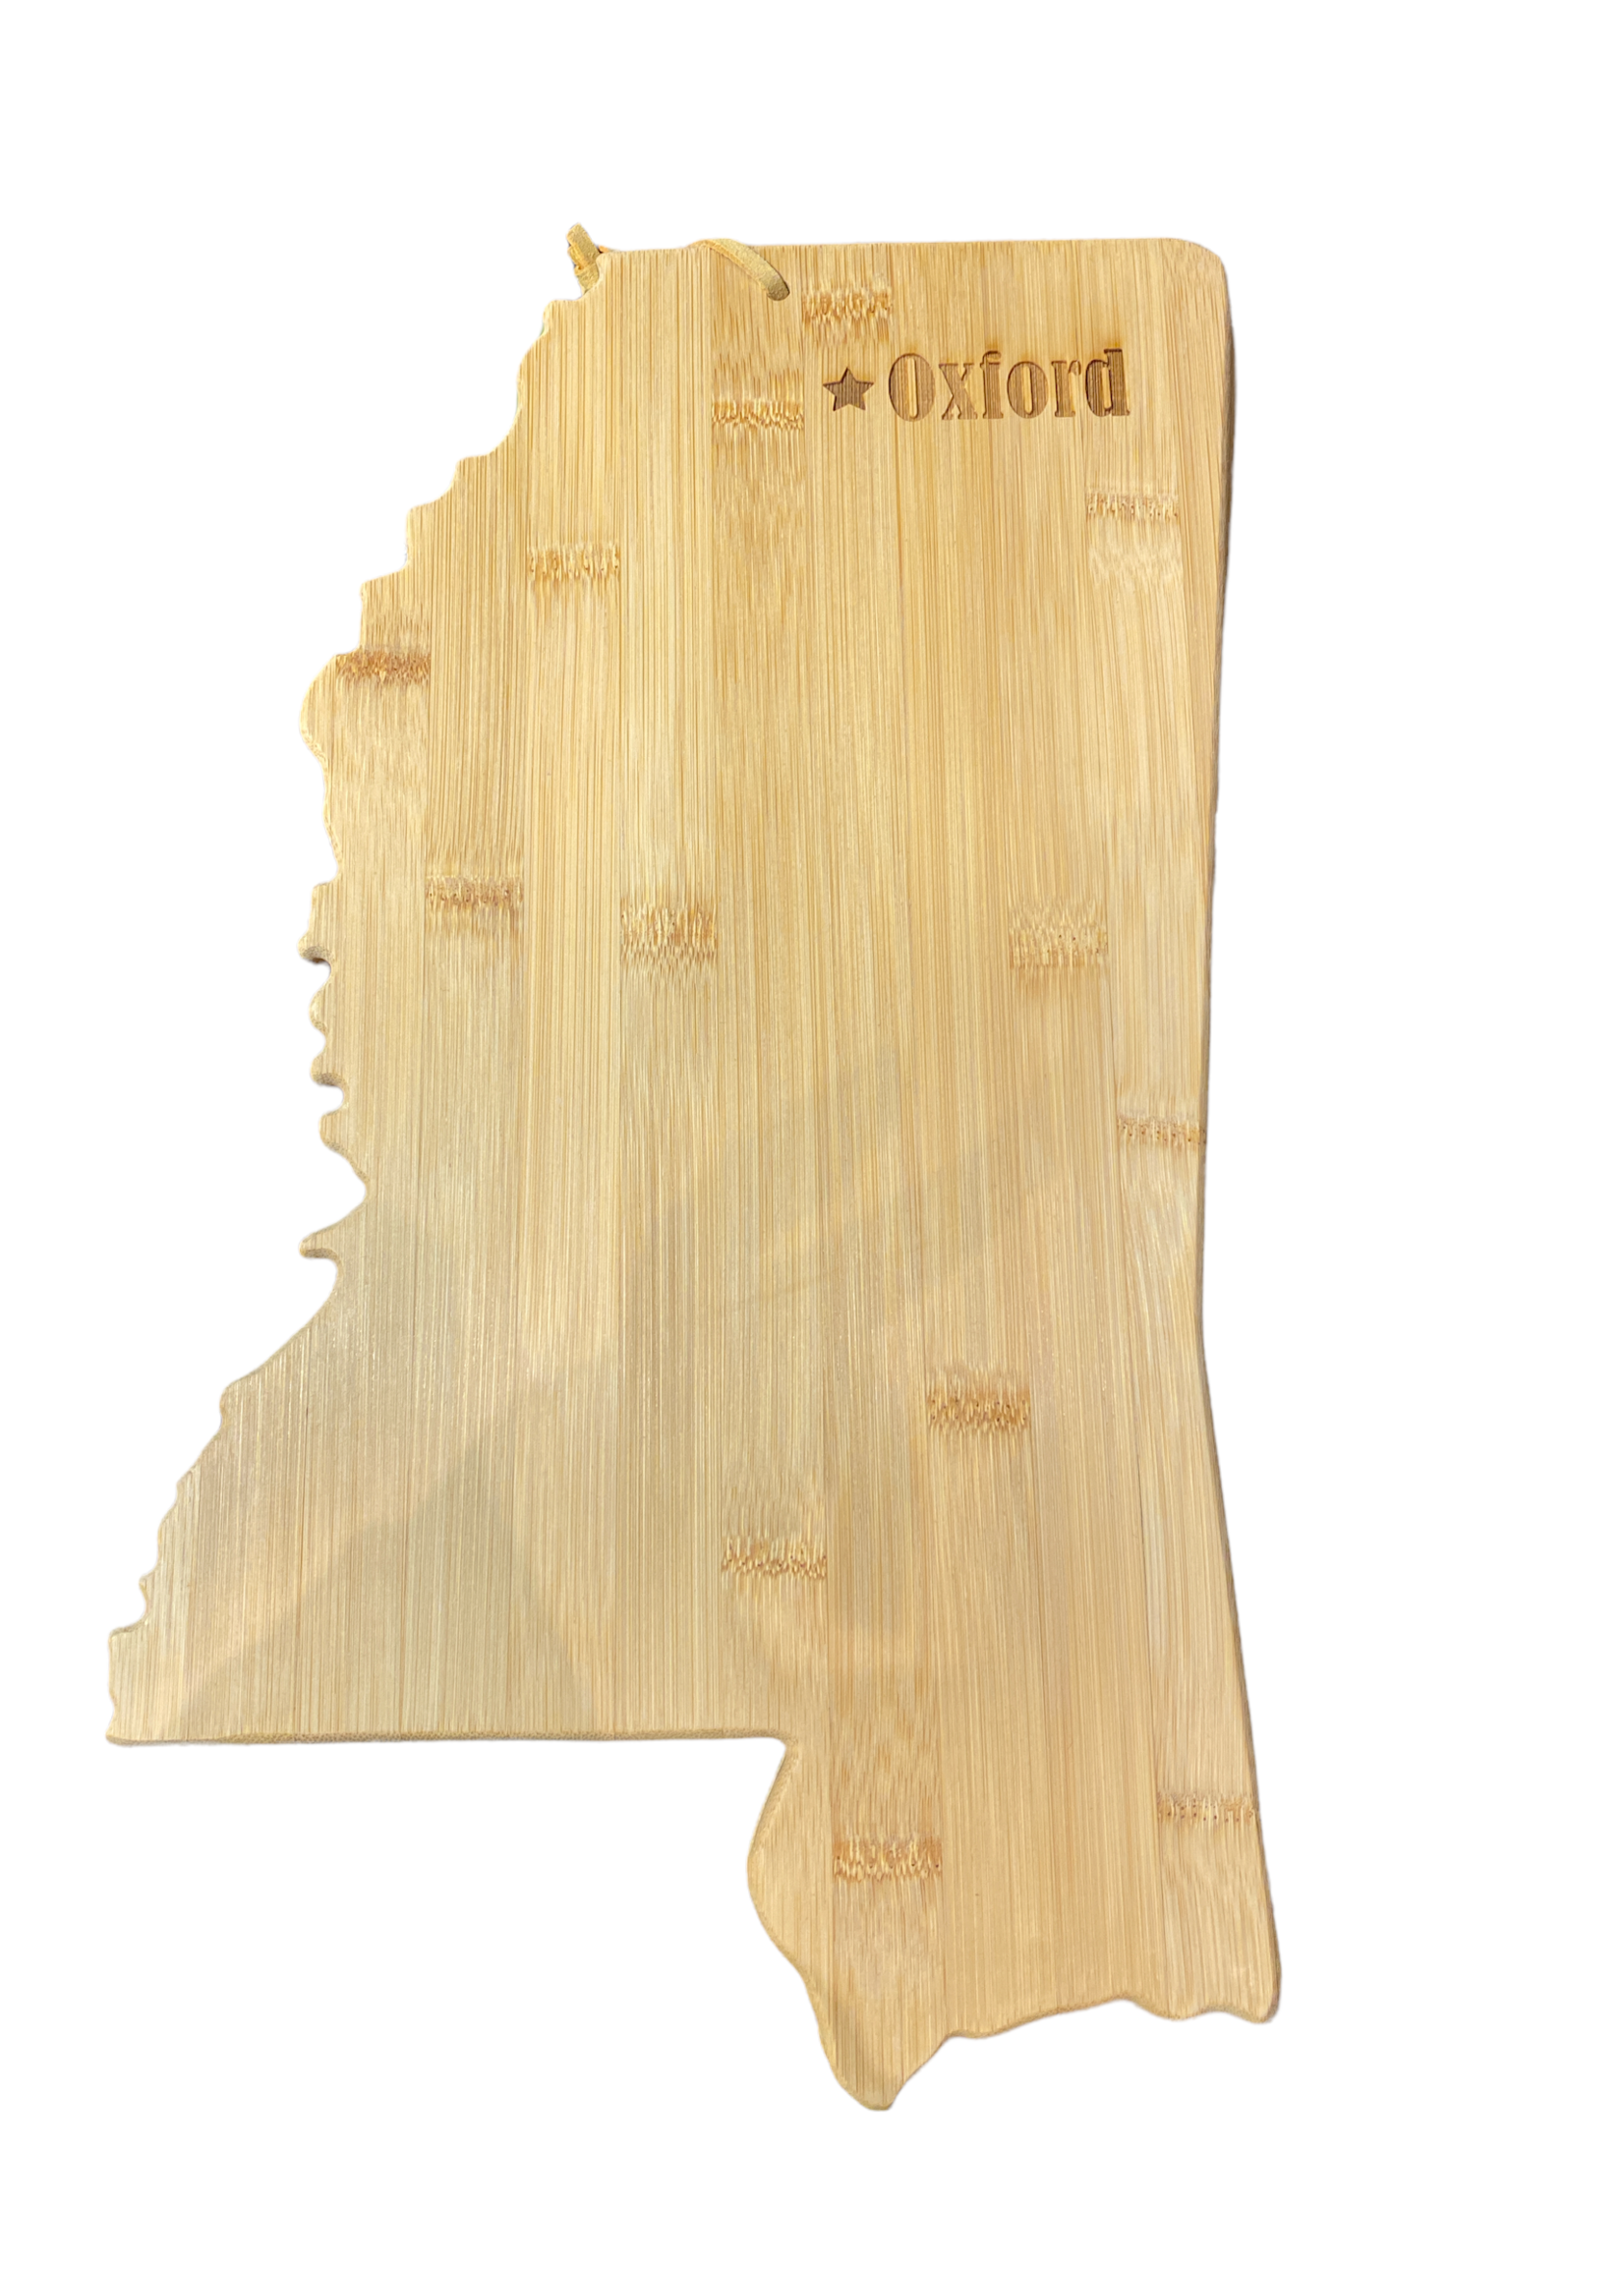 Totally Bamboo Oxford Mississippi Board